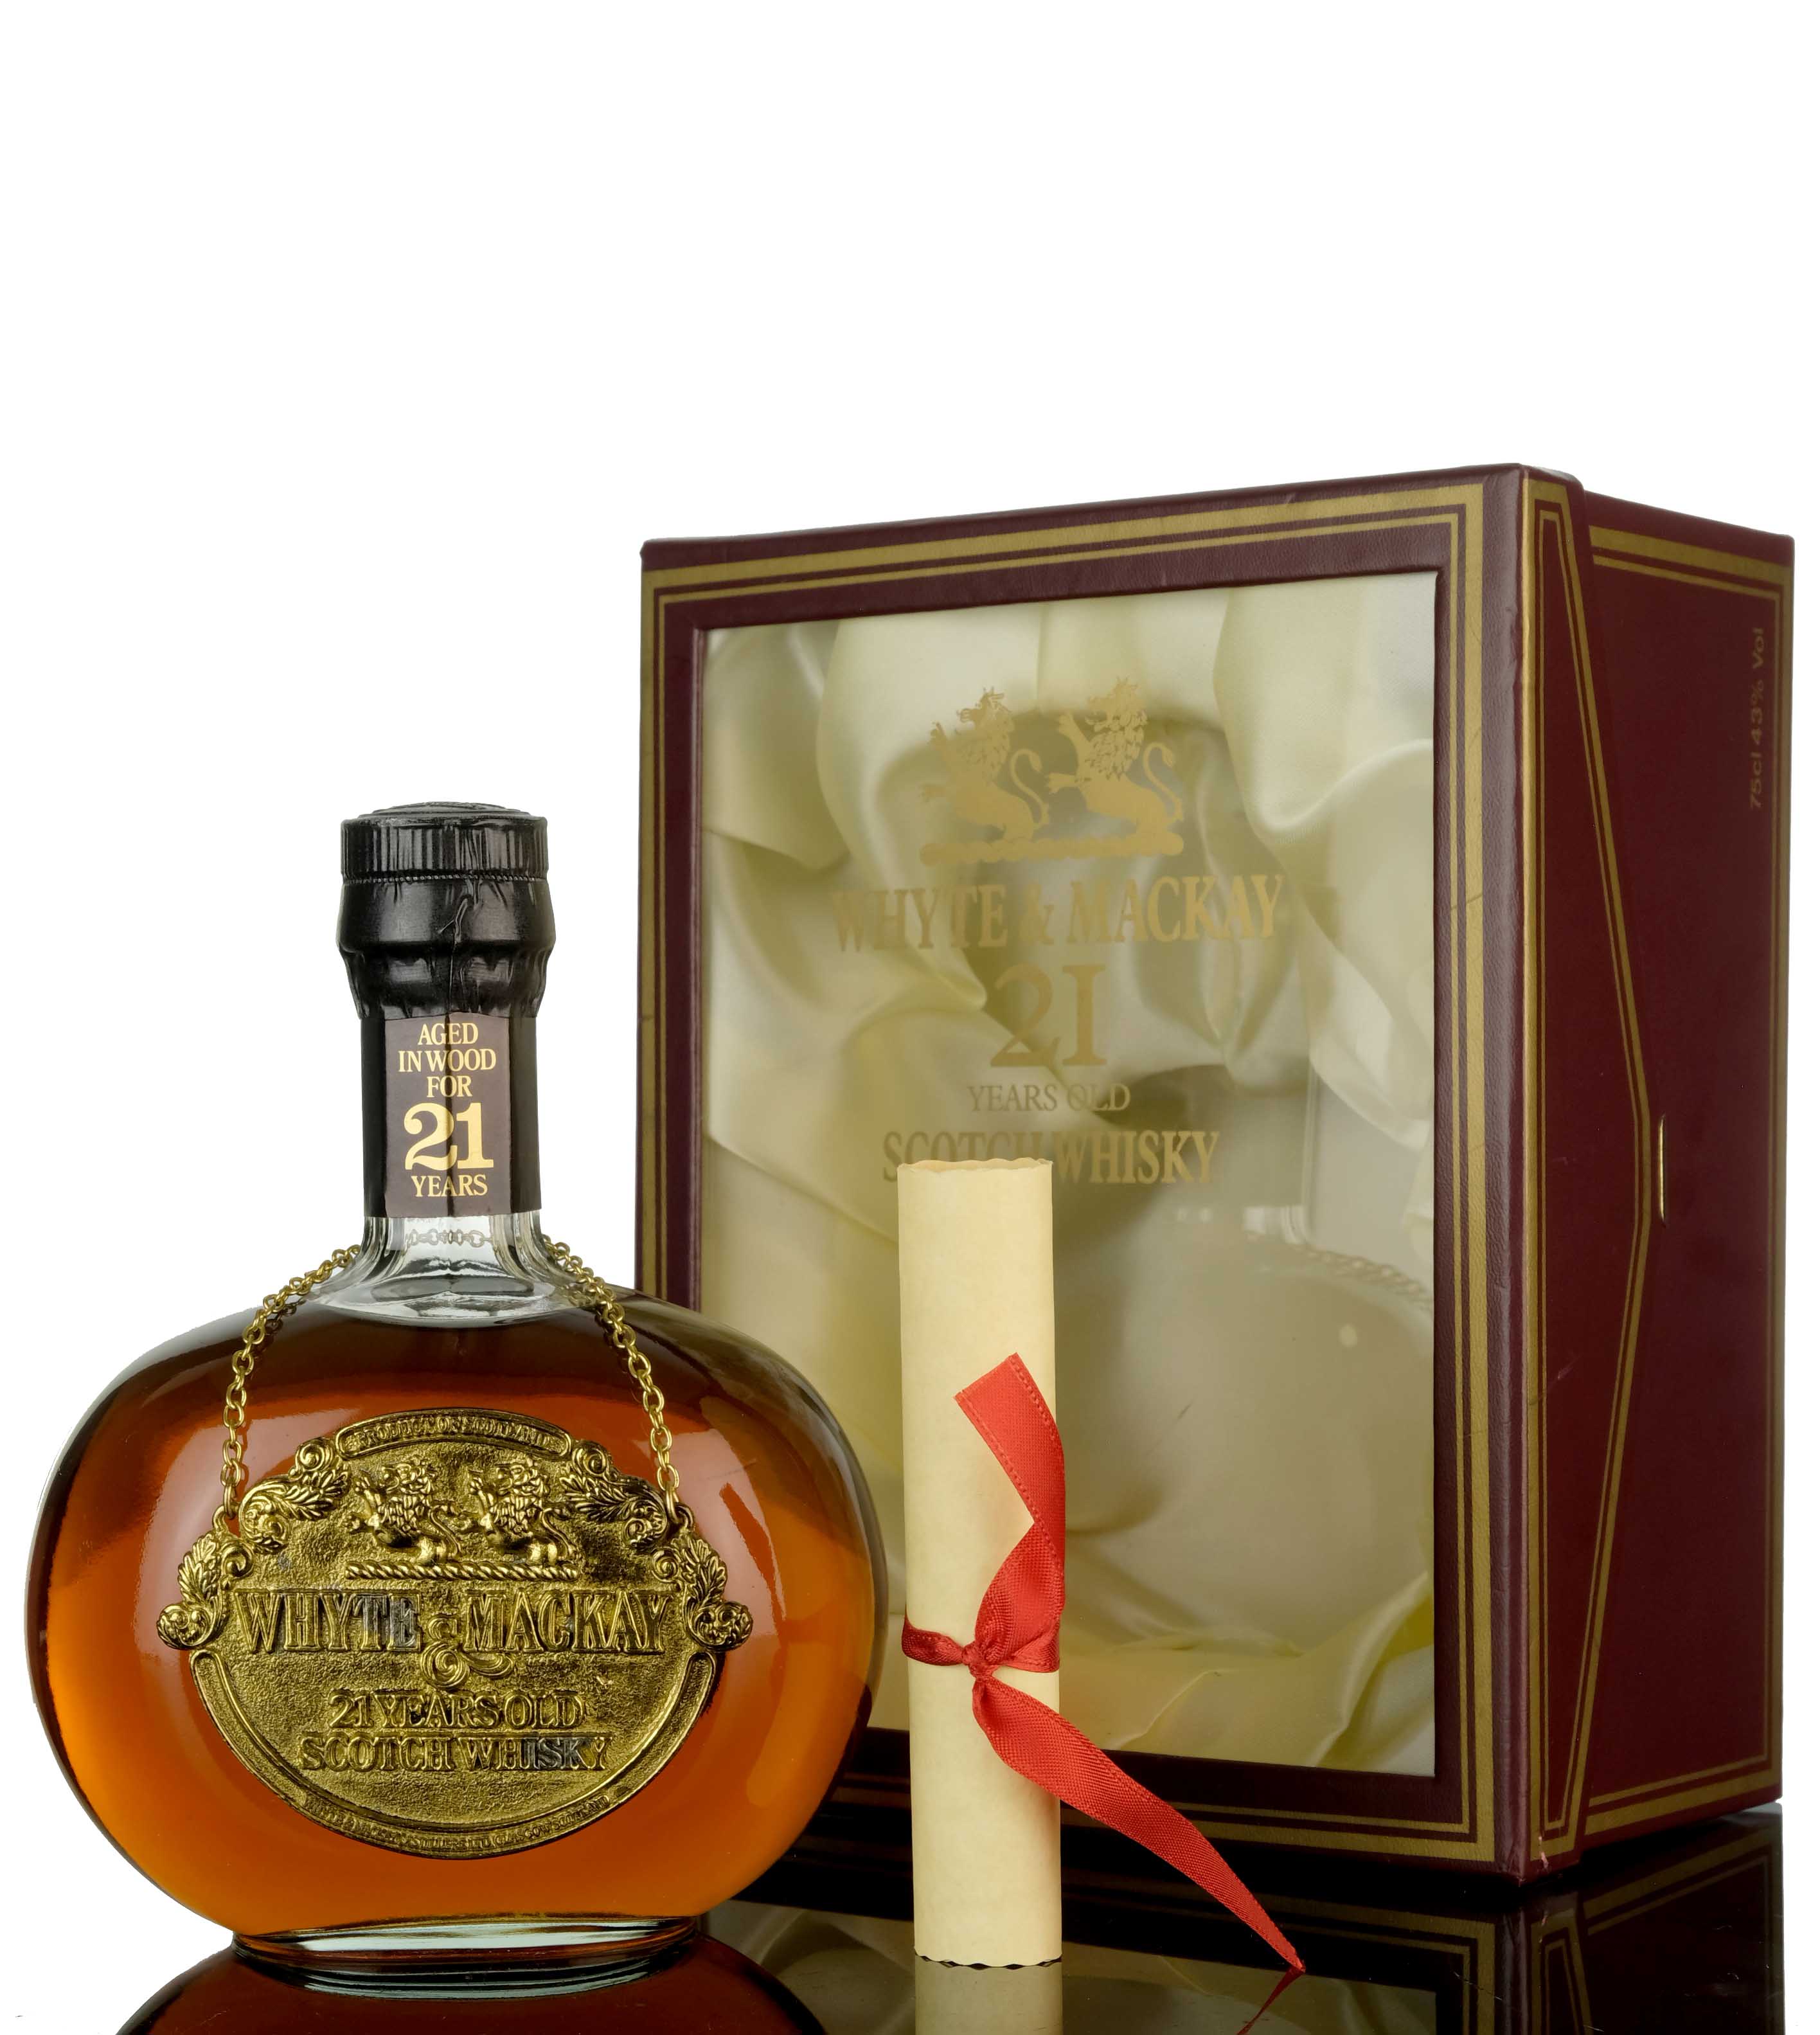 Whyte & Mackay 21 Year Old - 1980s